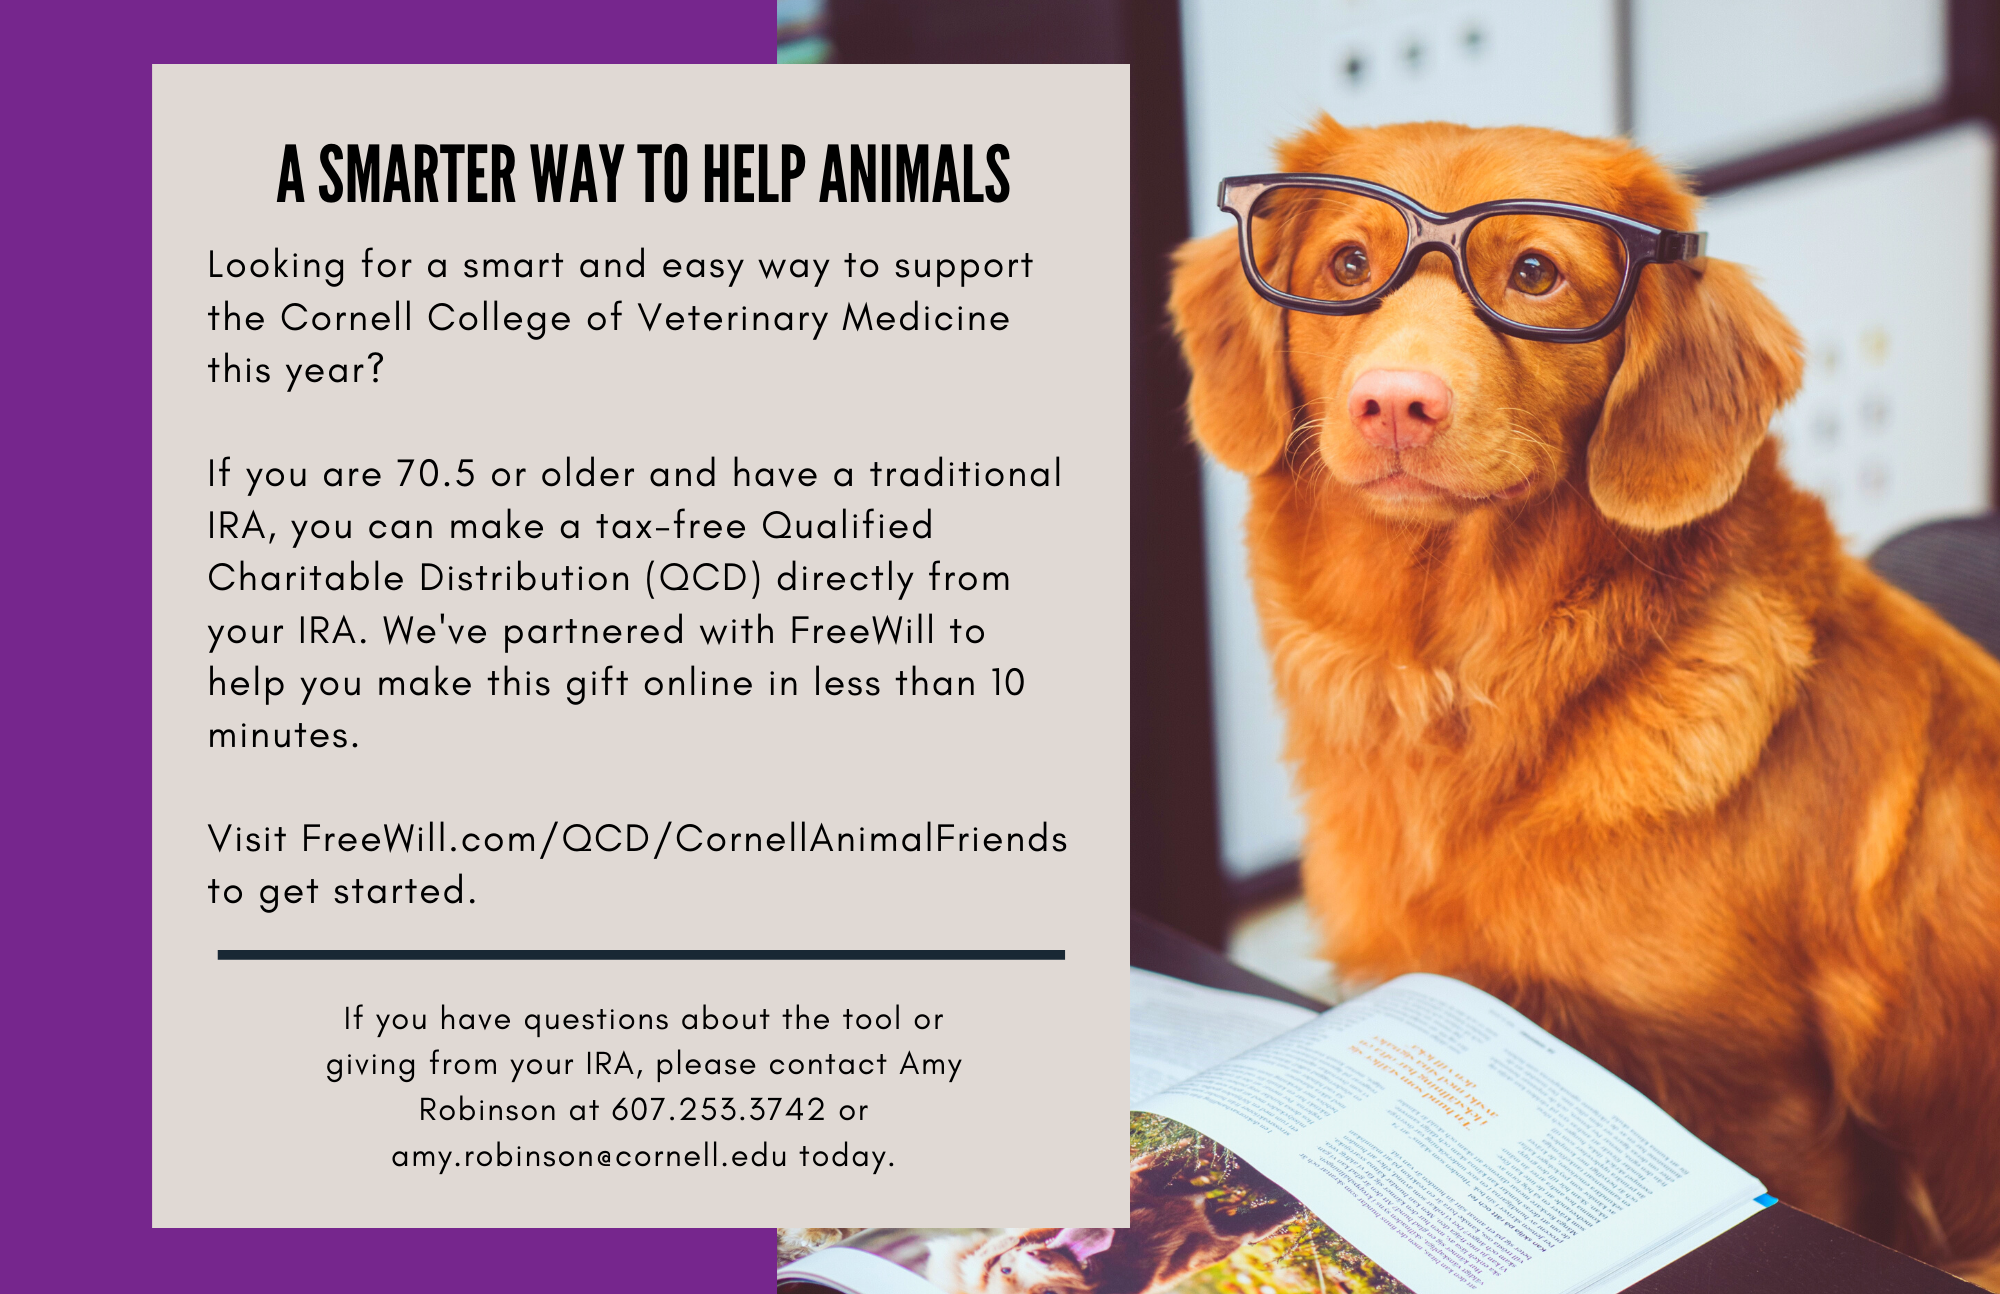 A Smarter Way to Help Animals Looking for a smart and easy way to support the Cornell College of Veterinary Medicine this year? If you are 70.5 or older and have a traditional IRA, you can make a tax-free Qualified Charitable Distribution (QCD) directly from your IRA. We’ve partnered with FreeWill to help you make this gift online in less than 10 minutes. Visit FreeWill.com/QCD/CornellAnimalFriends to get started. If you have any questions about the tool or giving from IRA, please contact Amy Robinson at 607.253.3742 or amy.robinson@cornell.edu today